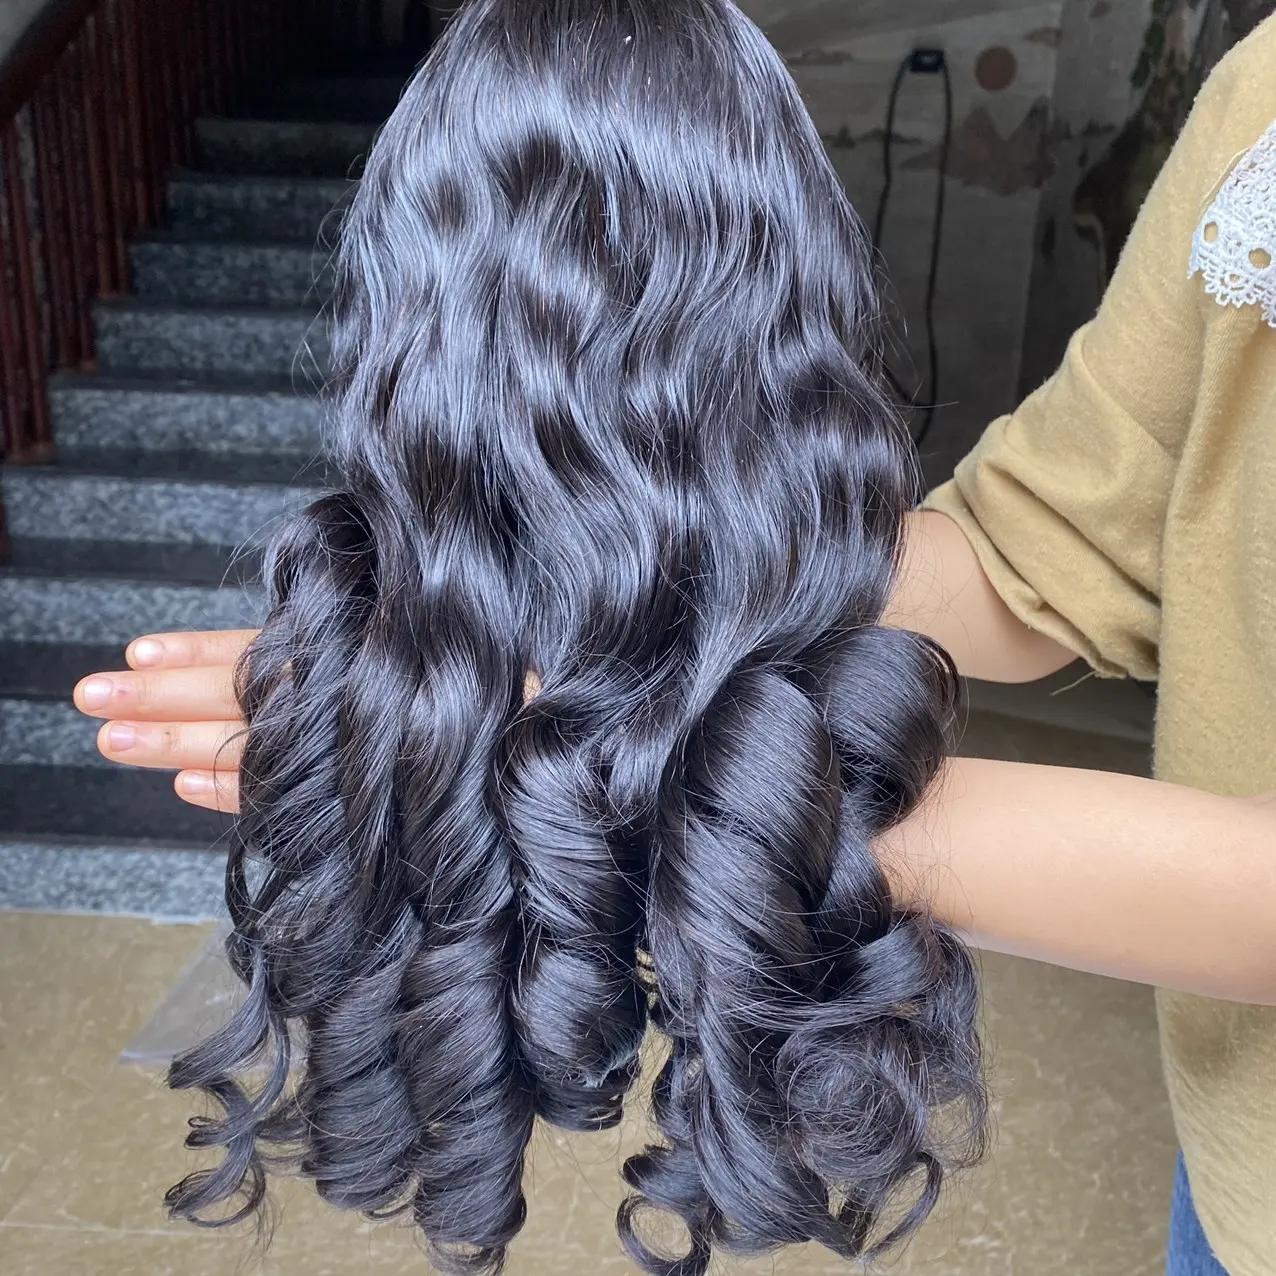 Wholesale bouncy curly human hair wigs for black women frontal human wig